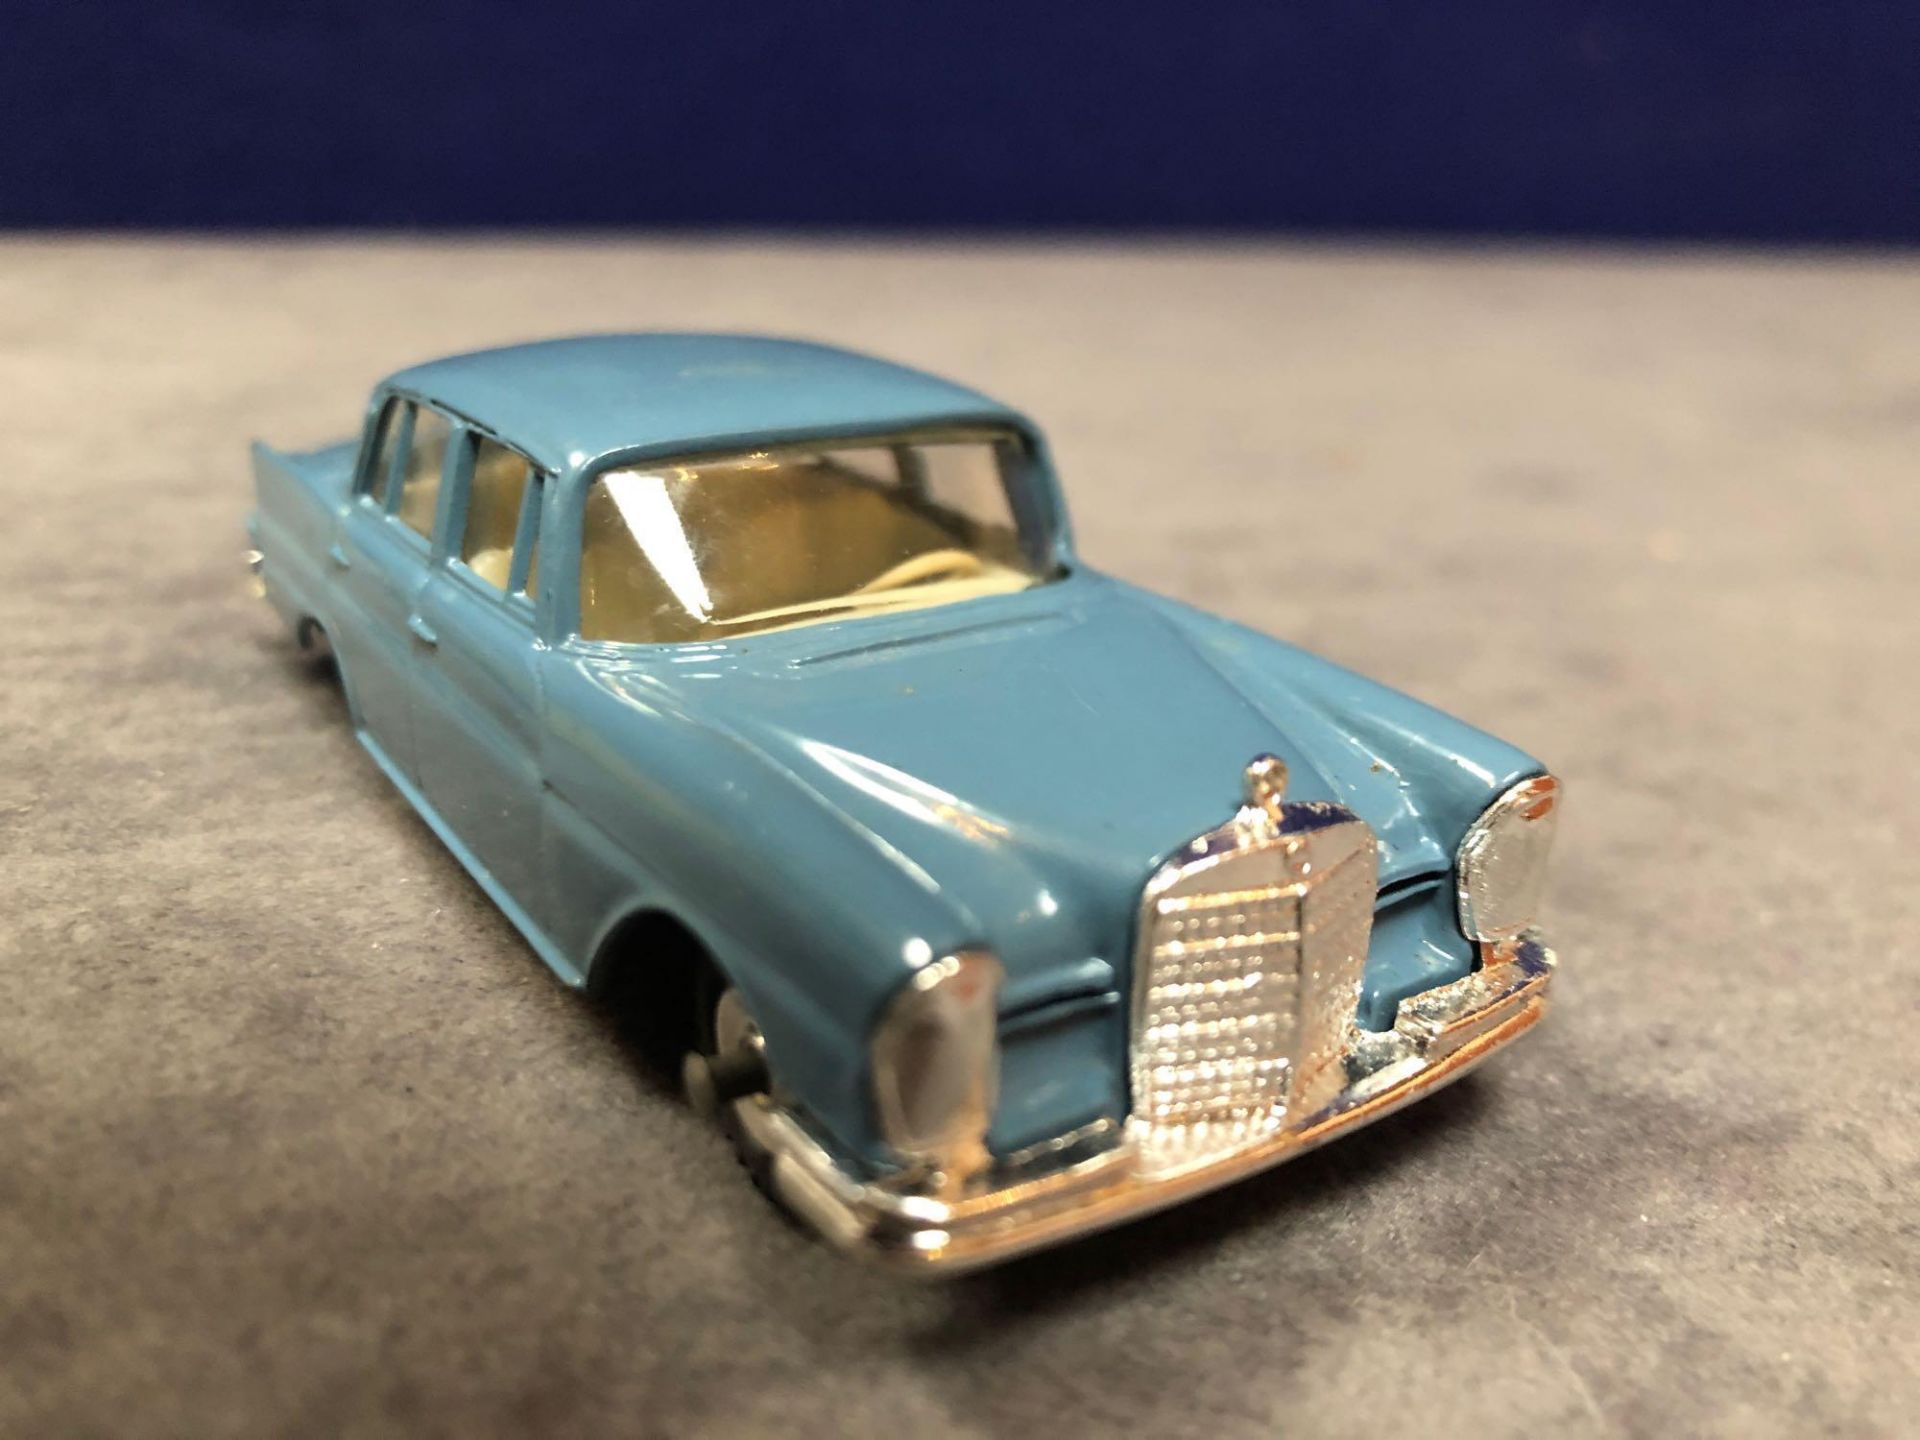 Dinky #186 Mercedes-Benz 220 SE Blue - Petrol Blue Body With White Interior. Spun Hubs. Mint in - Image 2 of 4